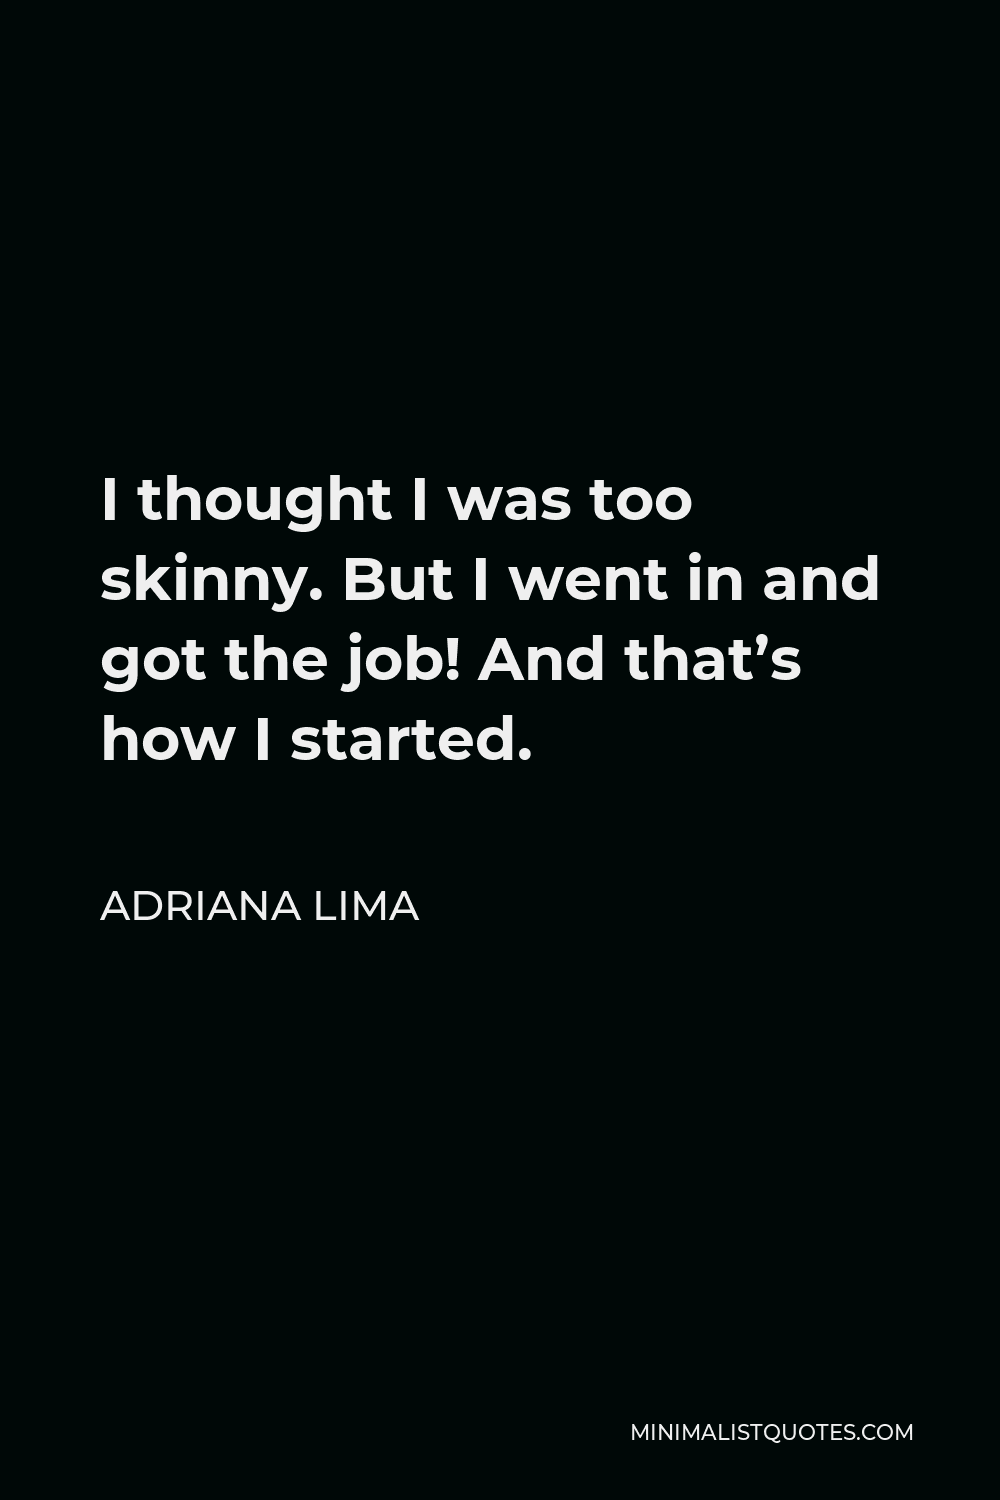 Adriana Lima Quote - I thought I was too skinny. But I went in and got the job! And that’s how I started.